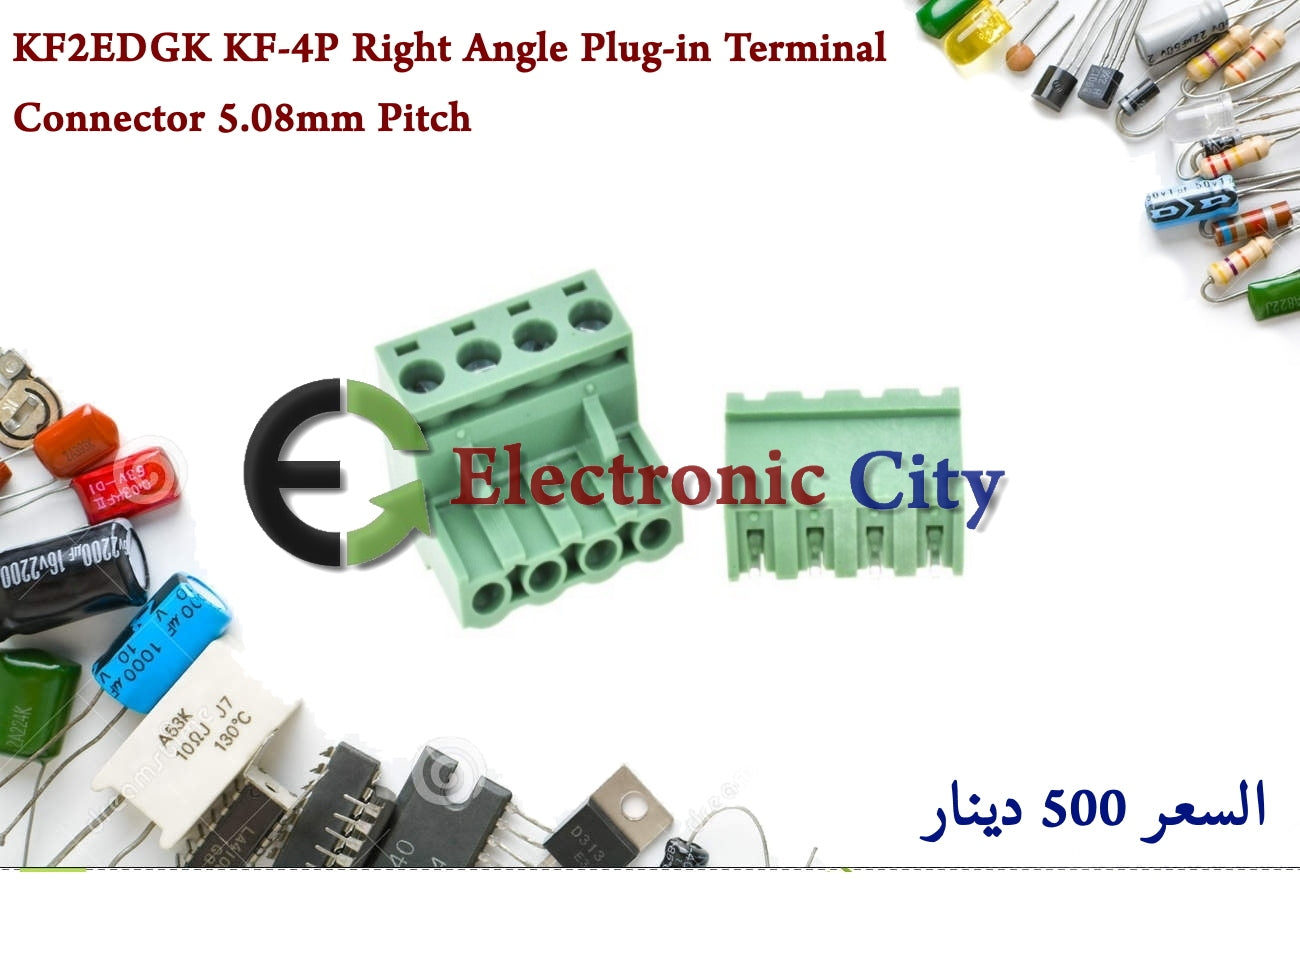 KF2EDGK KF-4P Right Angle Plug-in Terminal Connector 5.08mm Pitch